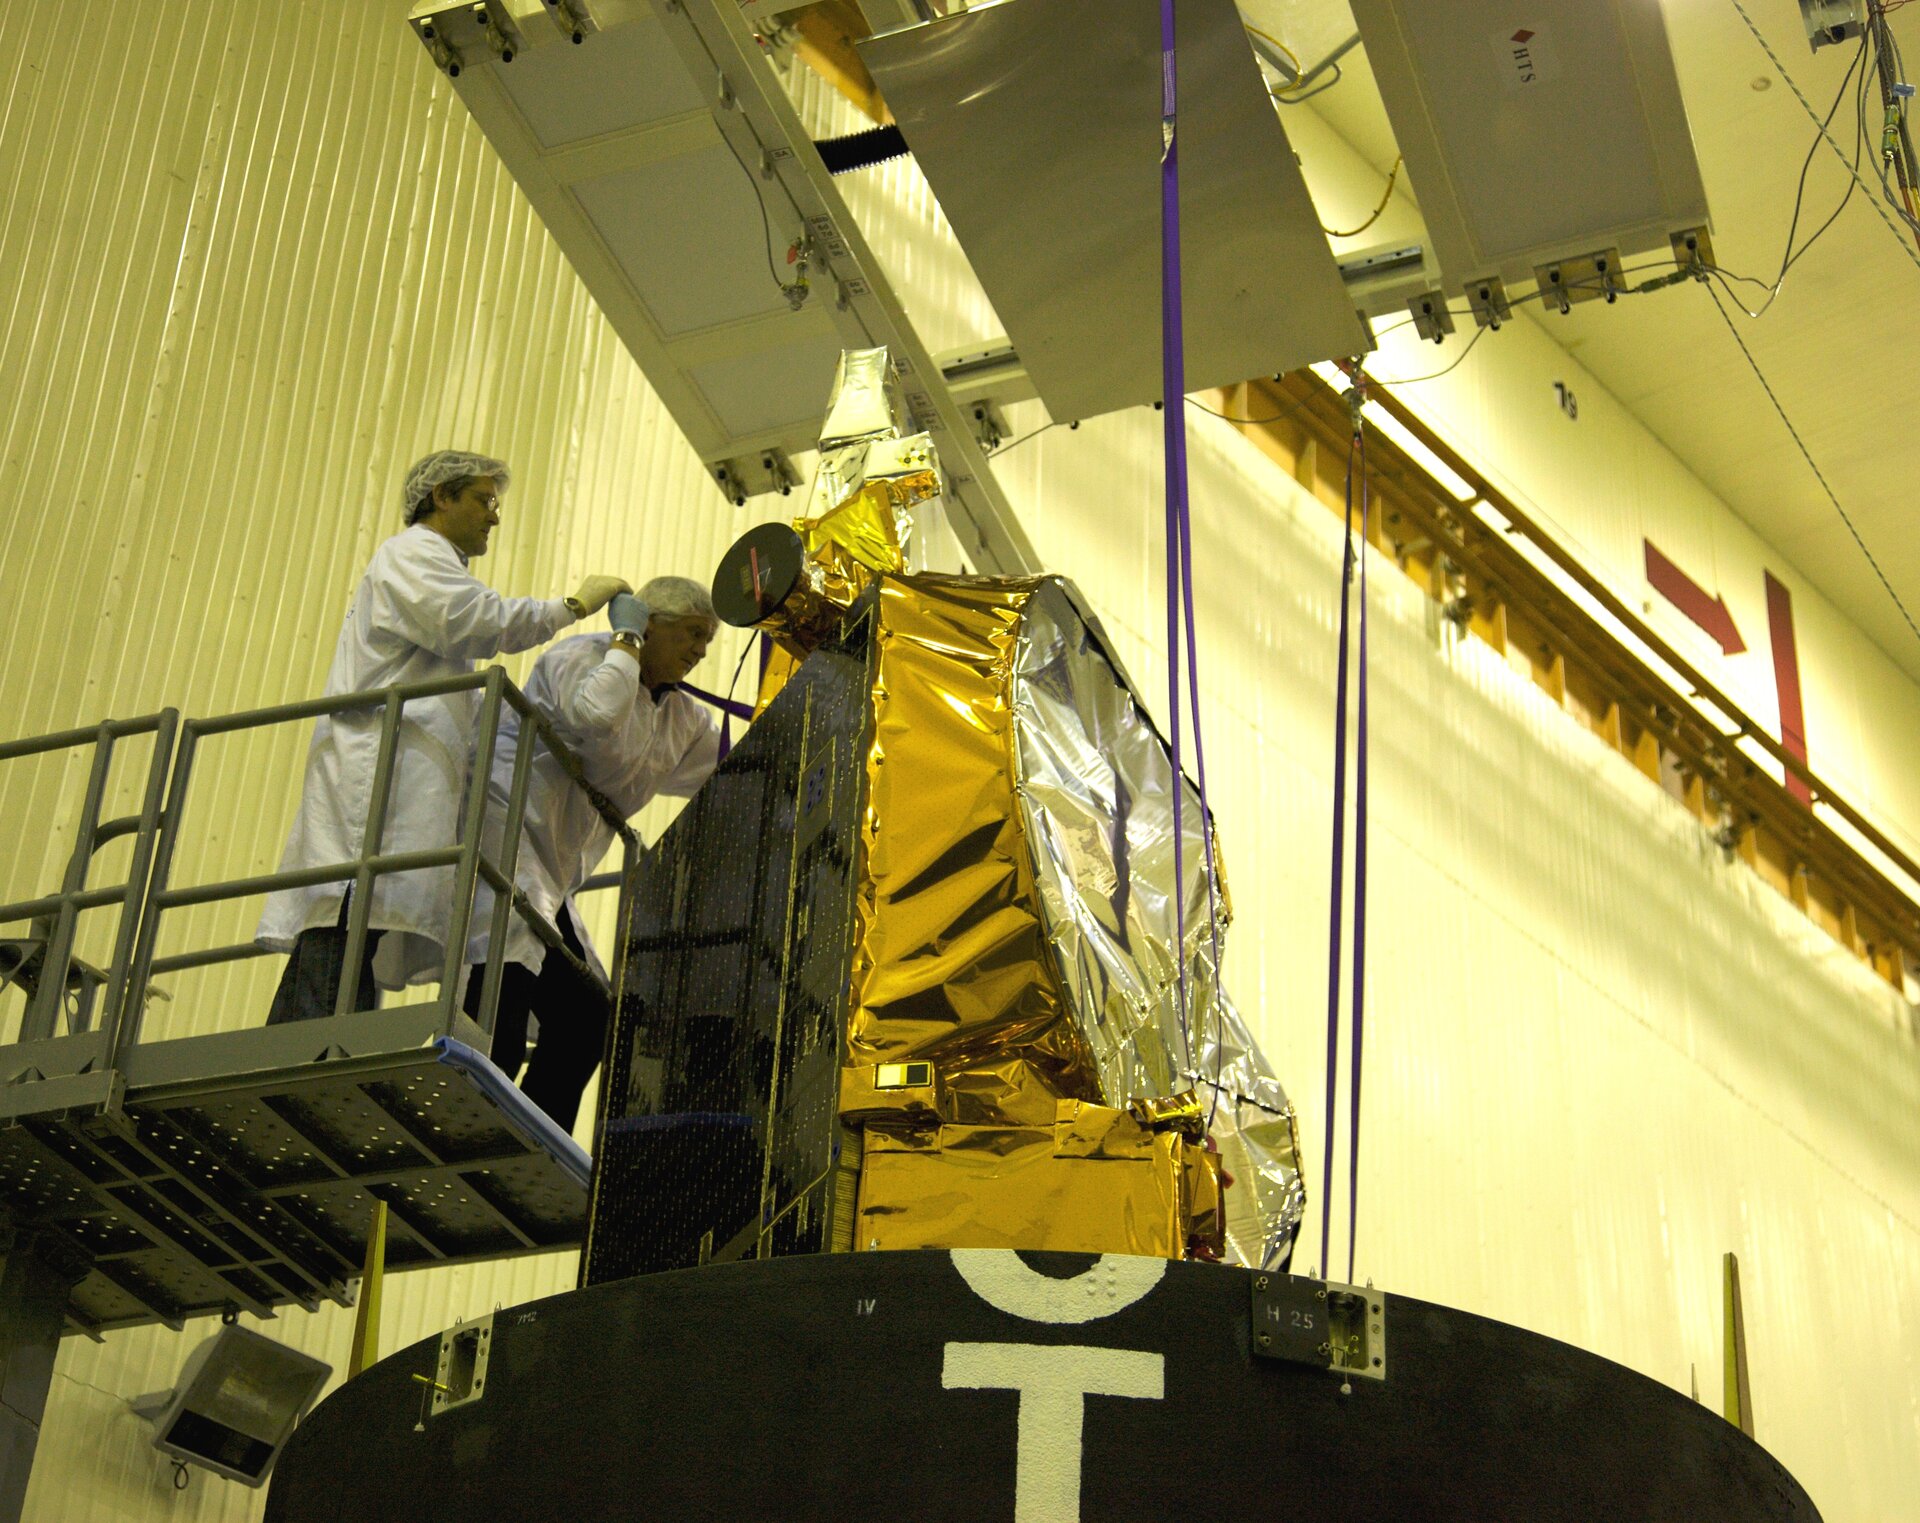 CryoSat-2 lowered into the fairing